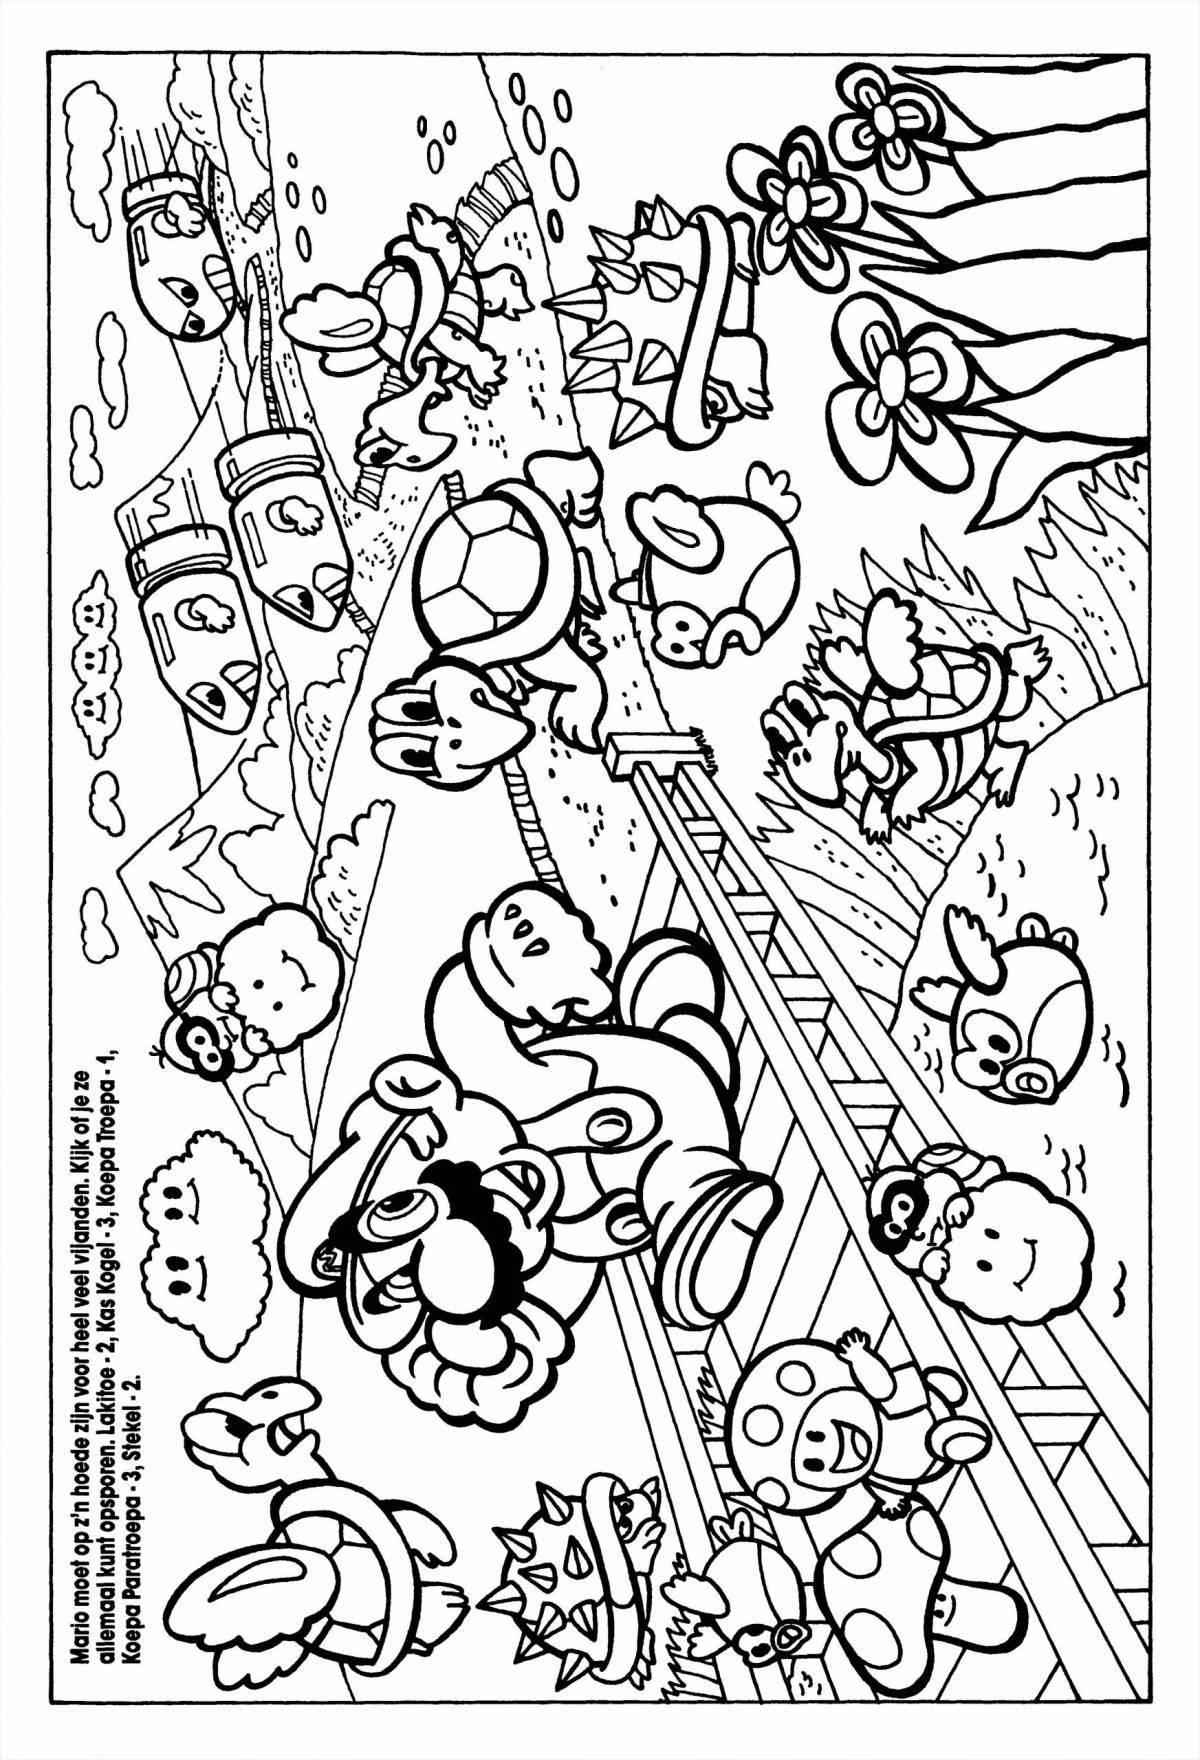 Colorful mario coloring by numbers